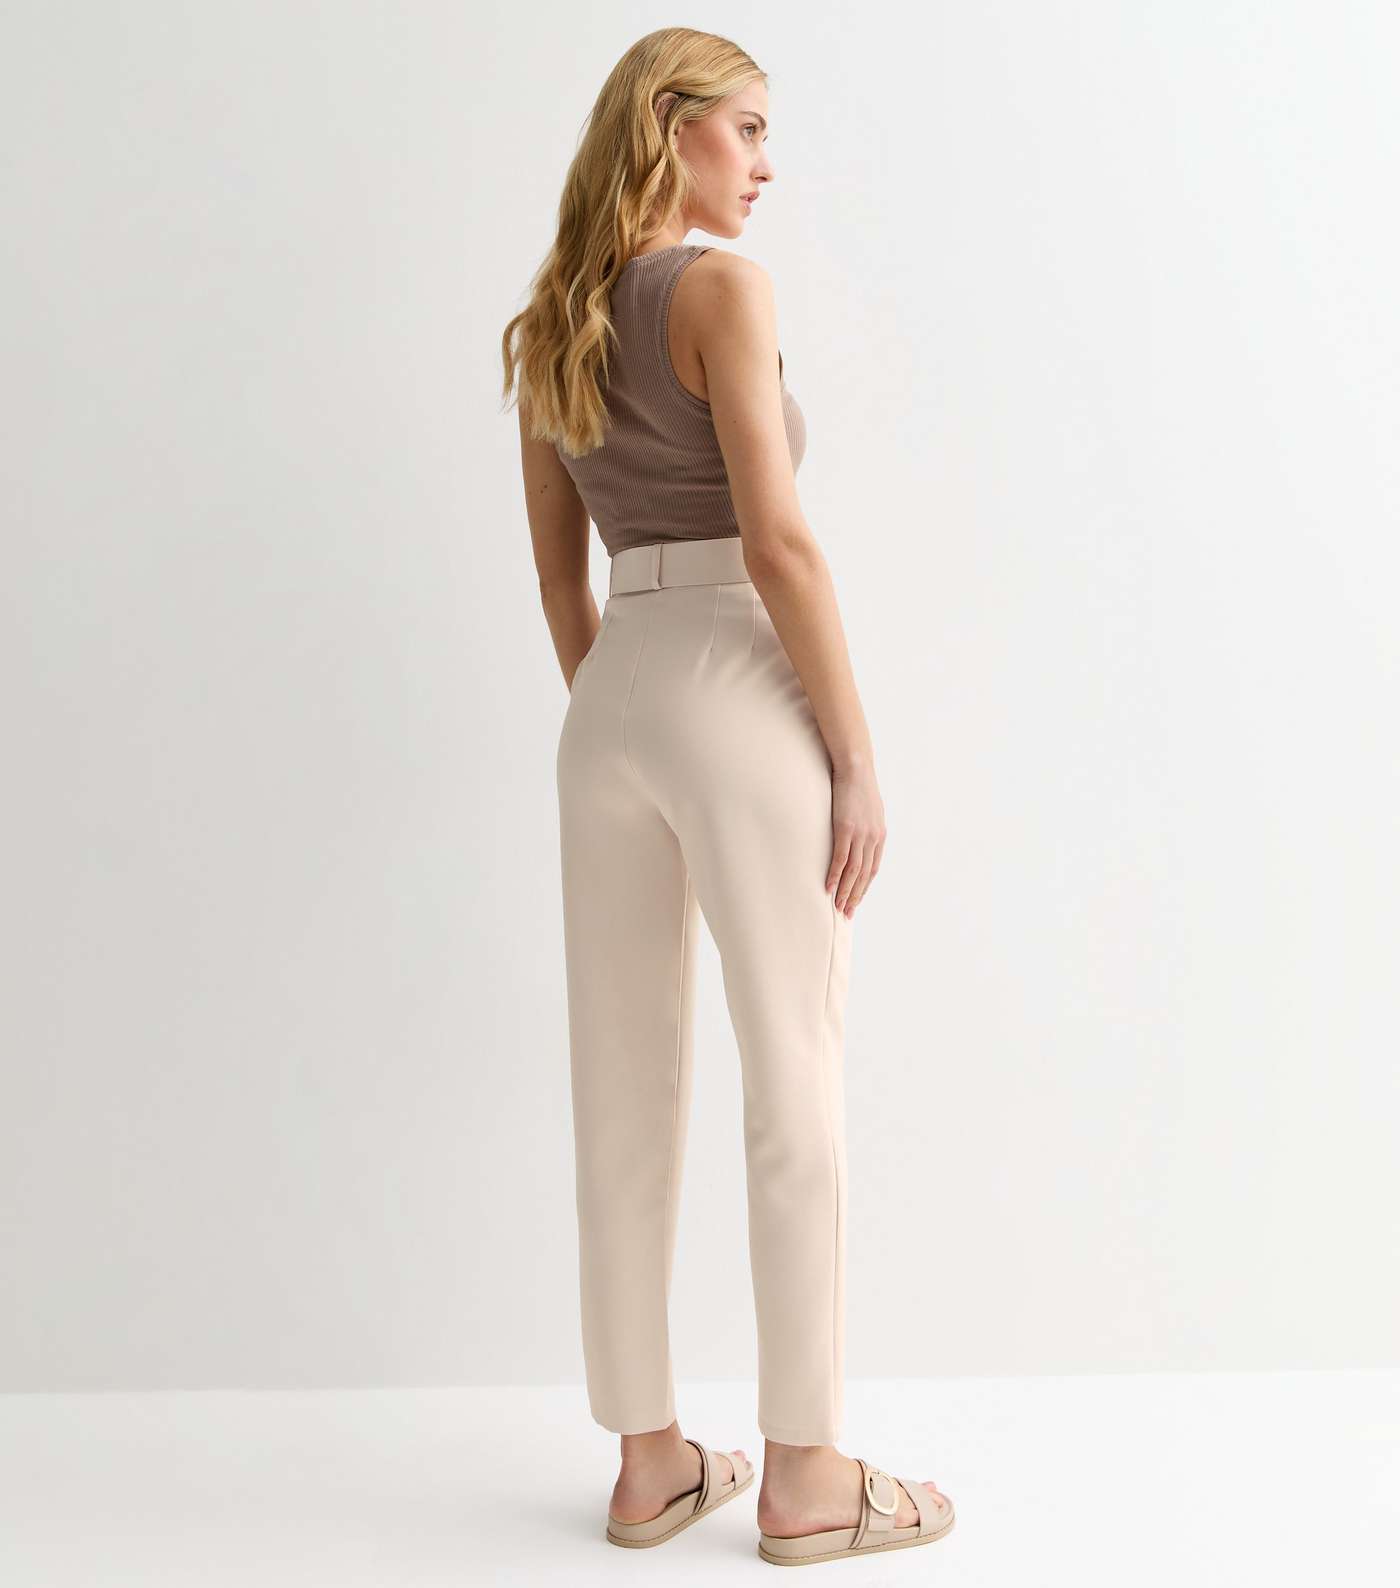 Gini London Cream Tapered Trousers Image 4